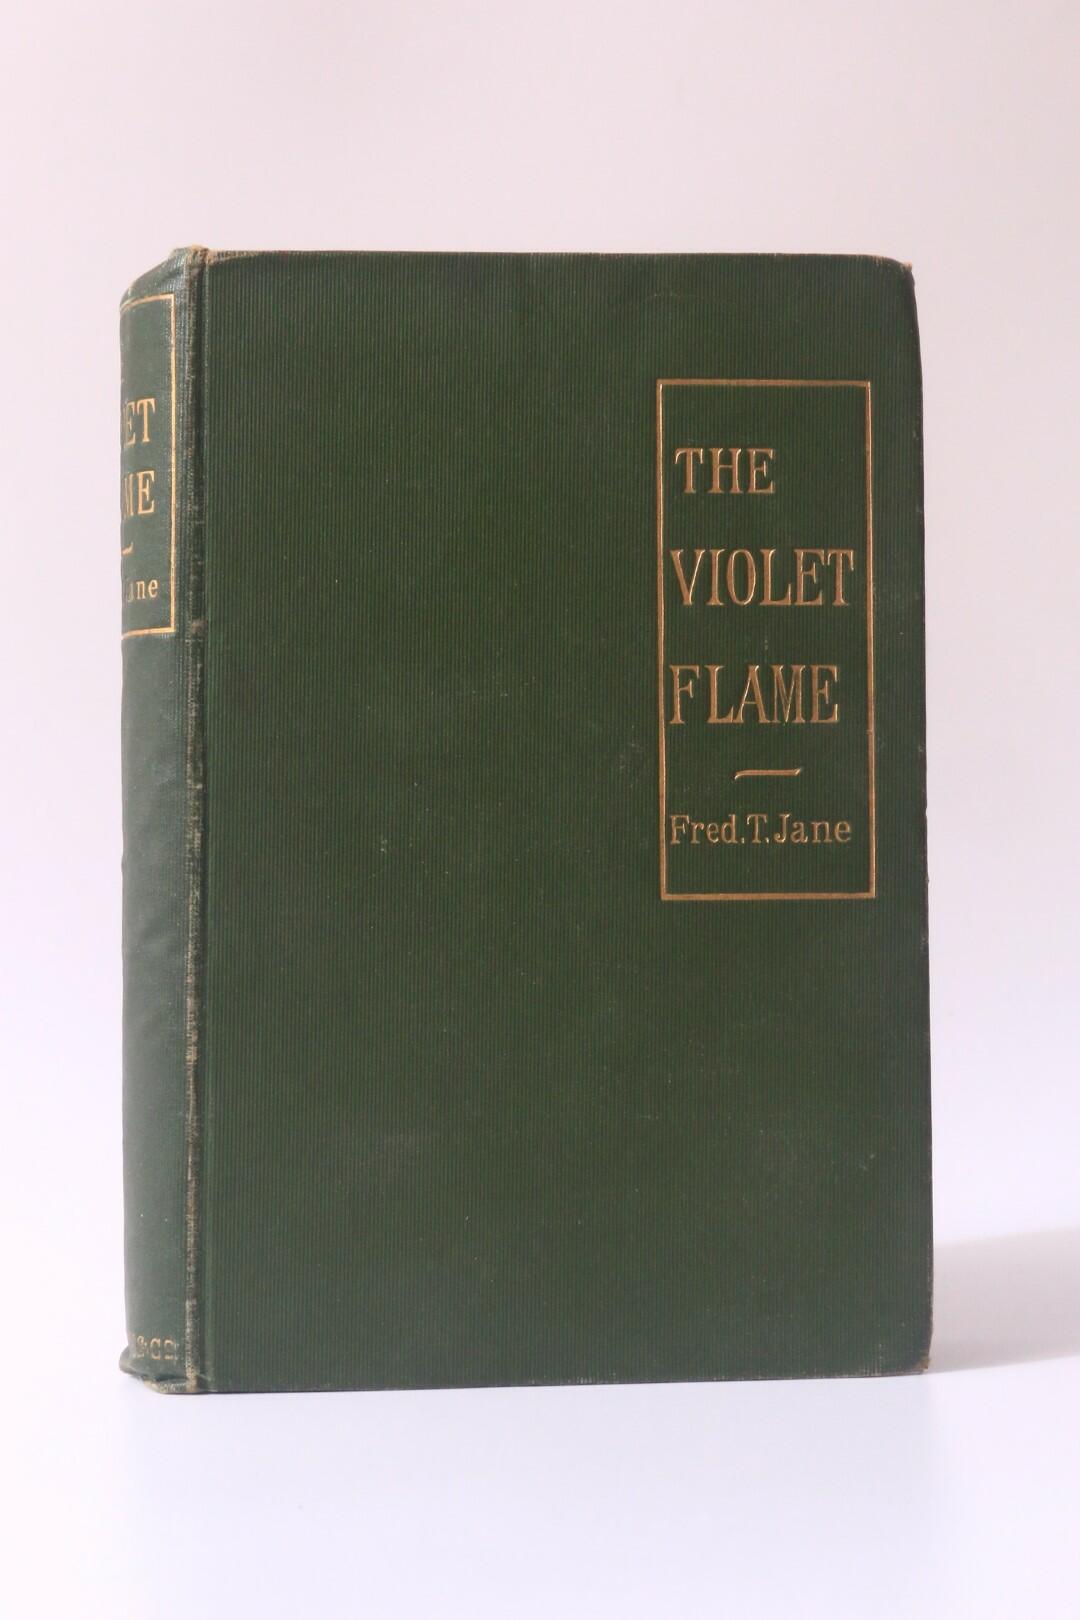 Fred T. Jane - The Violet Flame: The Story of Armageddon and After - Ward, Lock & Co., 1899, First Edition.